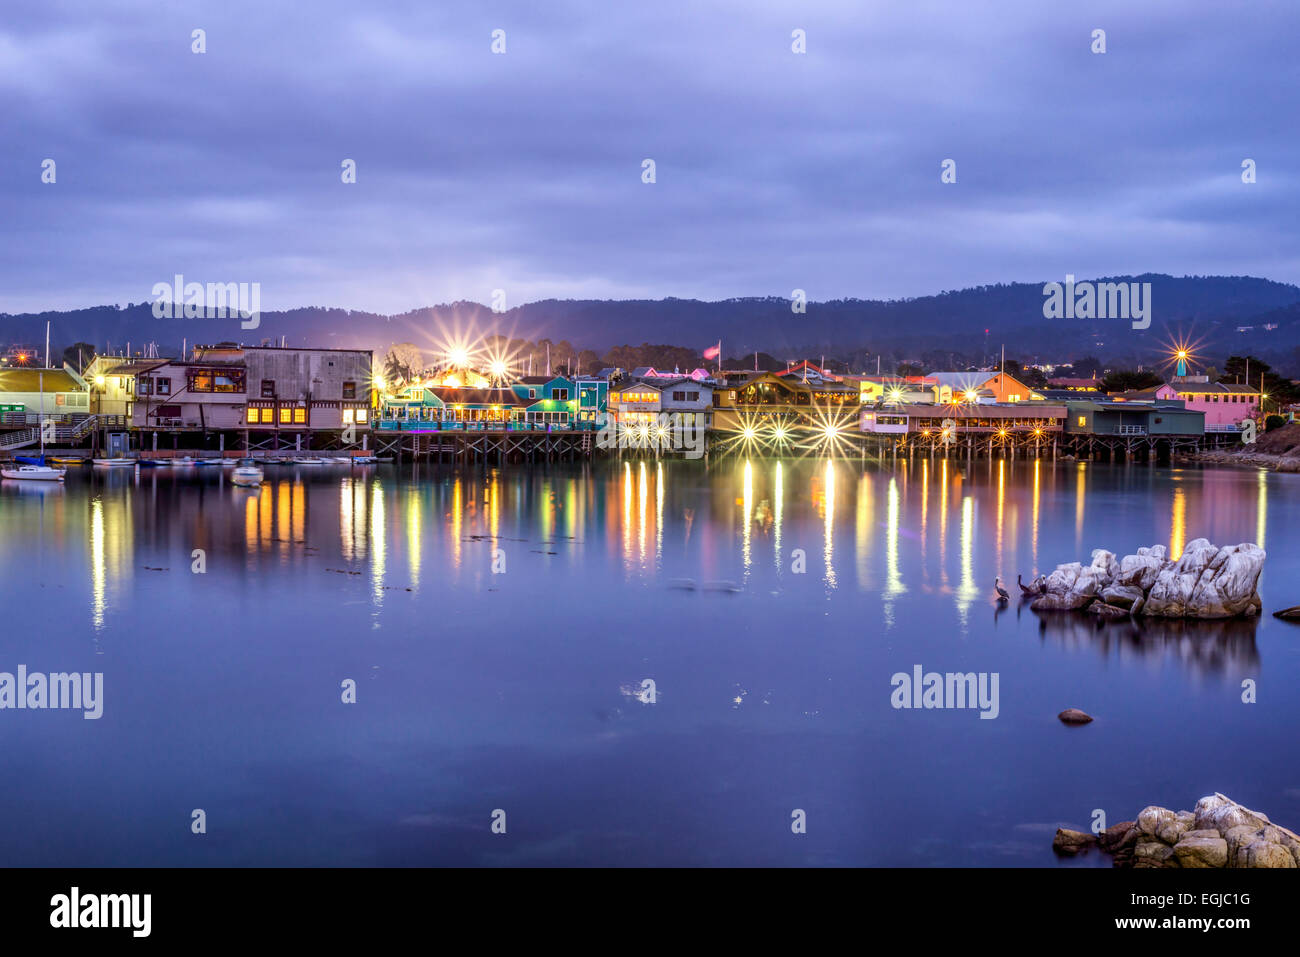 Fisherman's Wharf and Monterey Bay photographed in the evening. Monterey, California, United States. Stock Photo